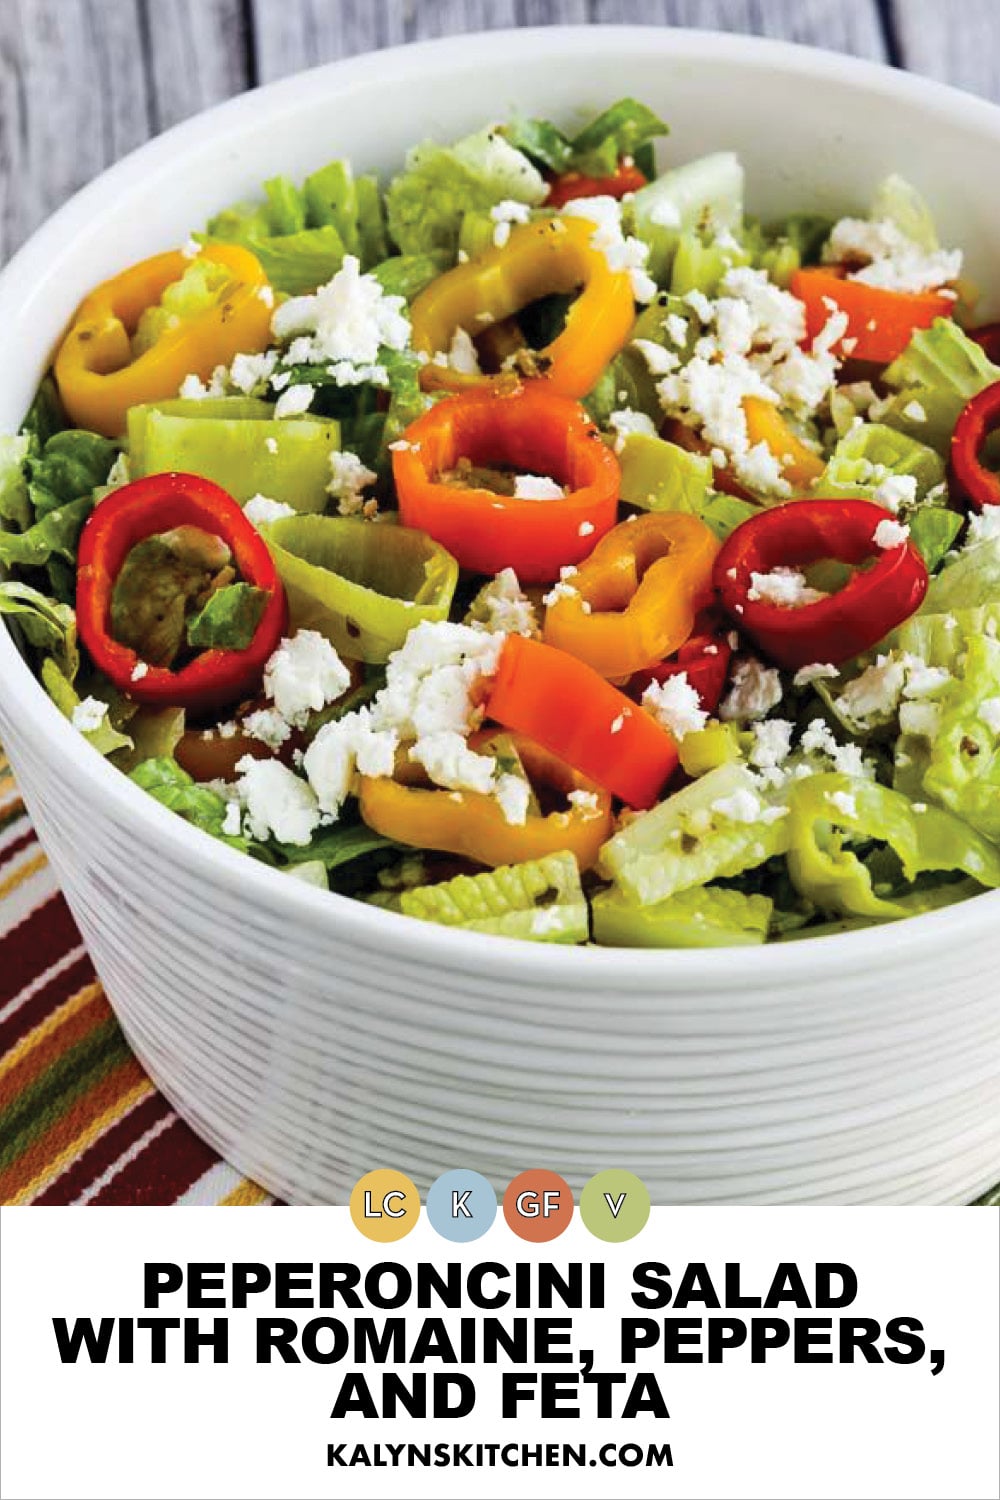 Pinterest image of Peperoncini Salad with Romaine, Peppers, and Feta